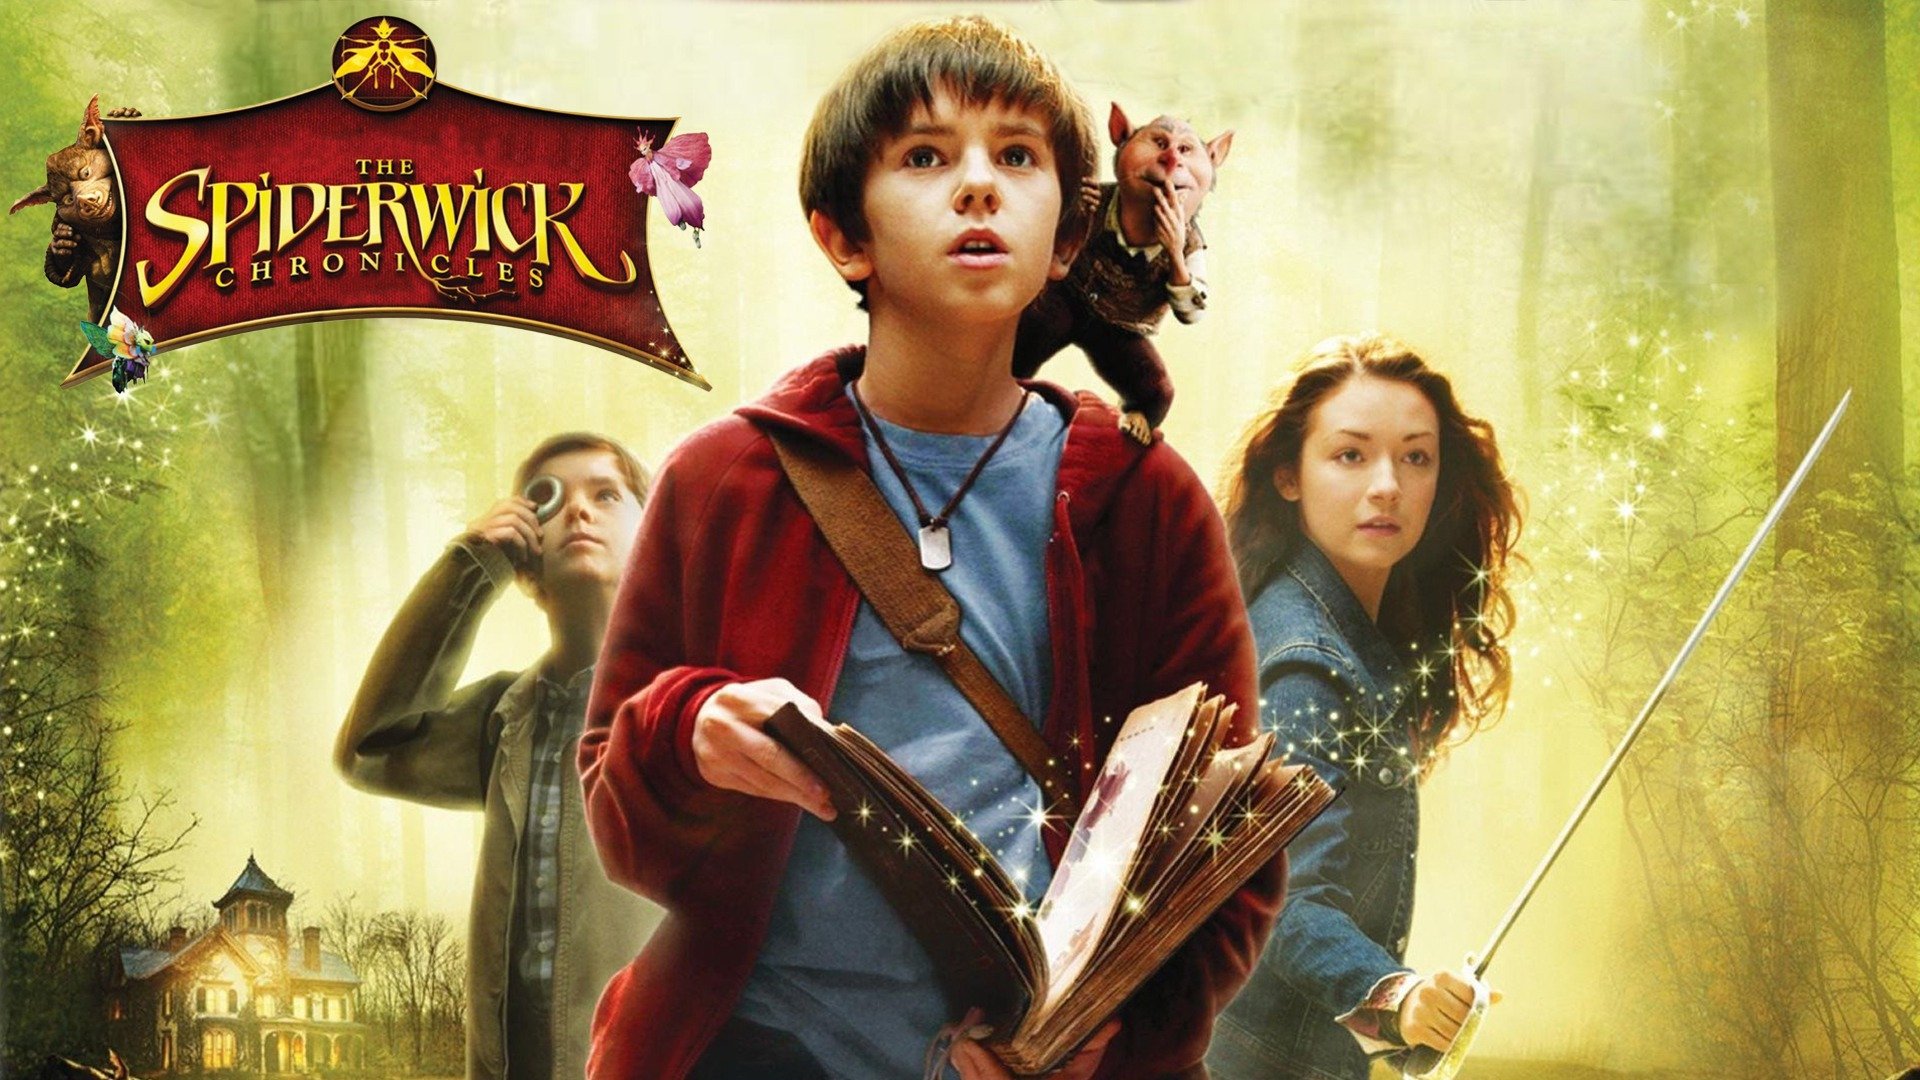 The Spiderwick Chronicles Trailer 1 Trailers & Videos Rotten Tomatoes